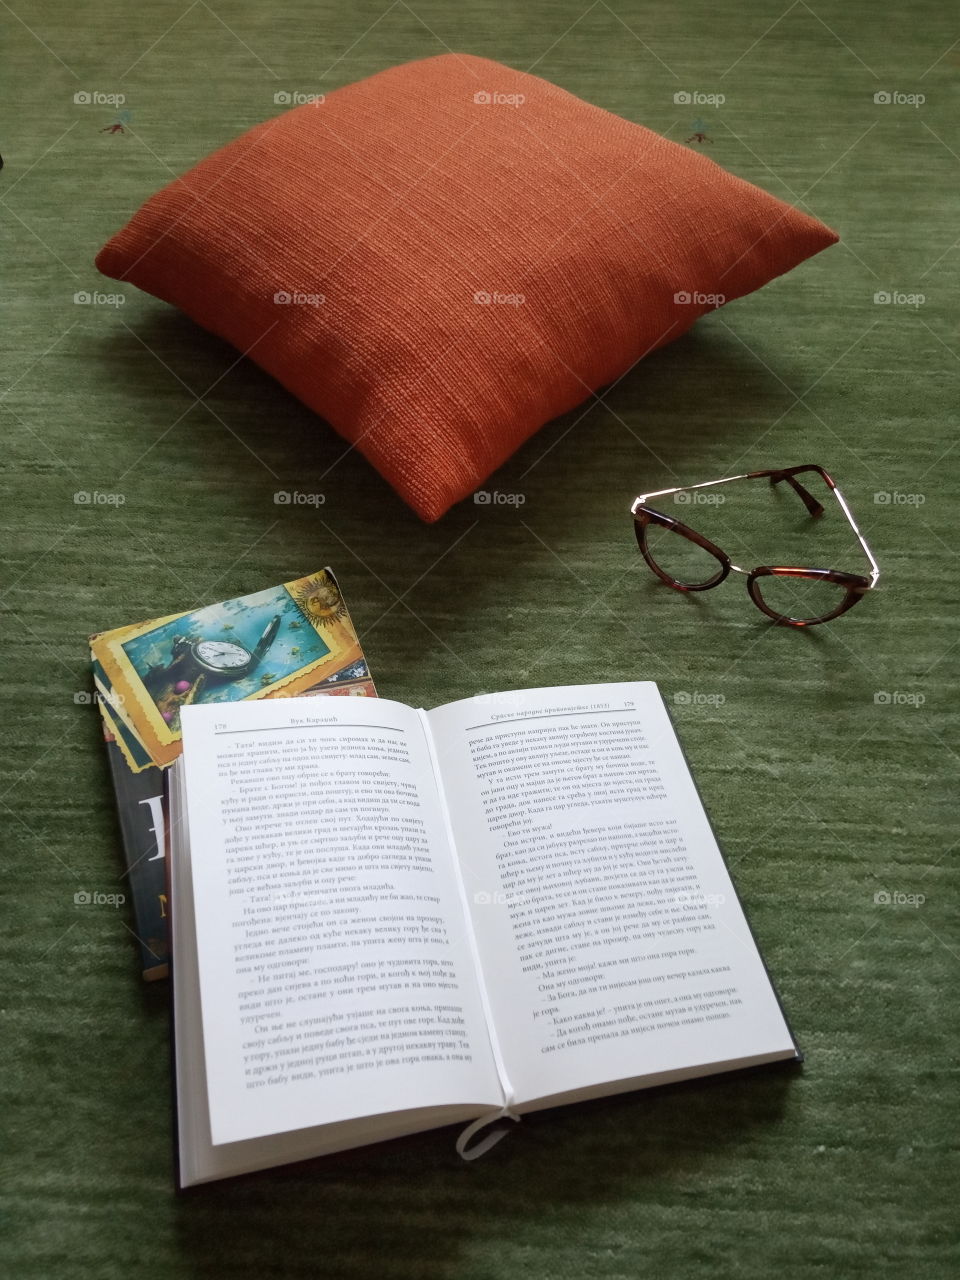 Interesting aregment of light and shadows, green and orange colour, and cloth texture, features pillow books and glasses.